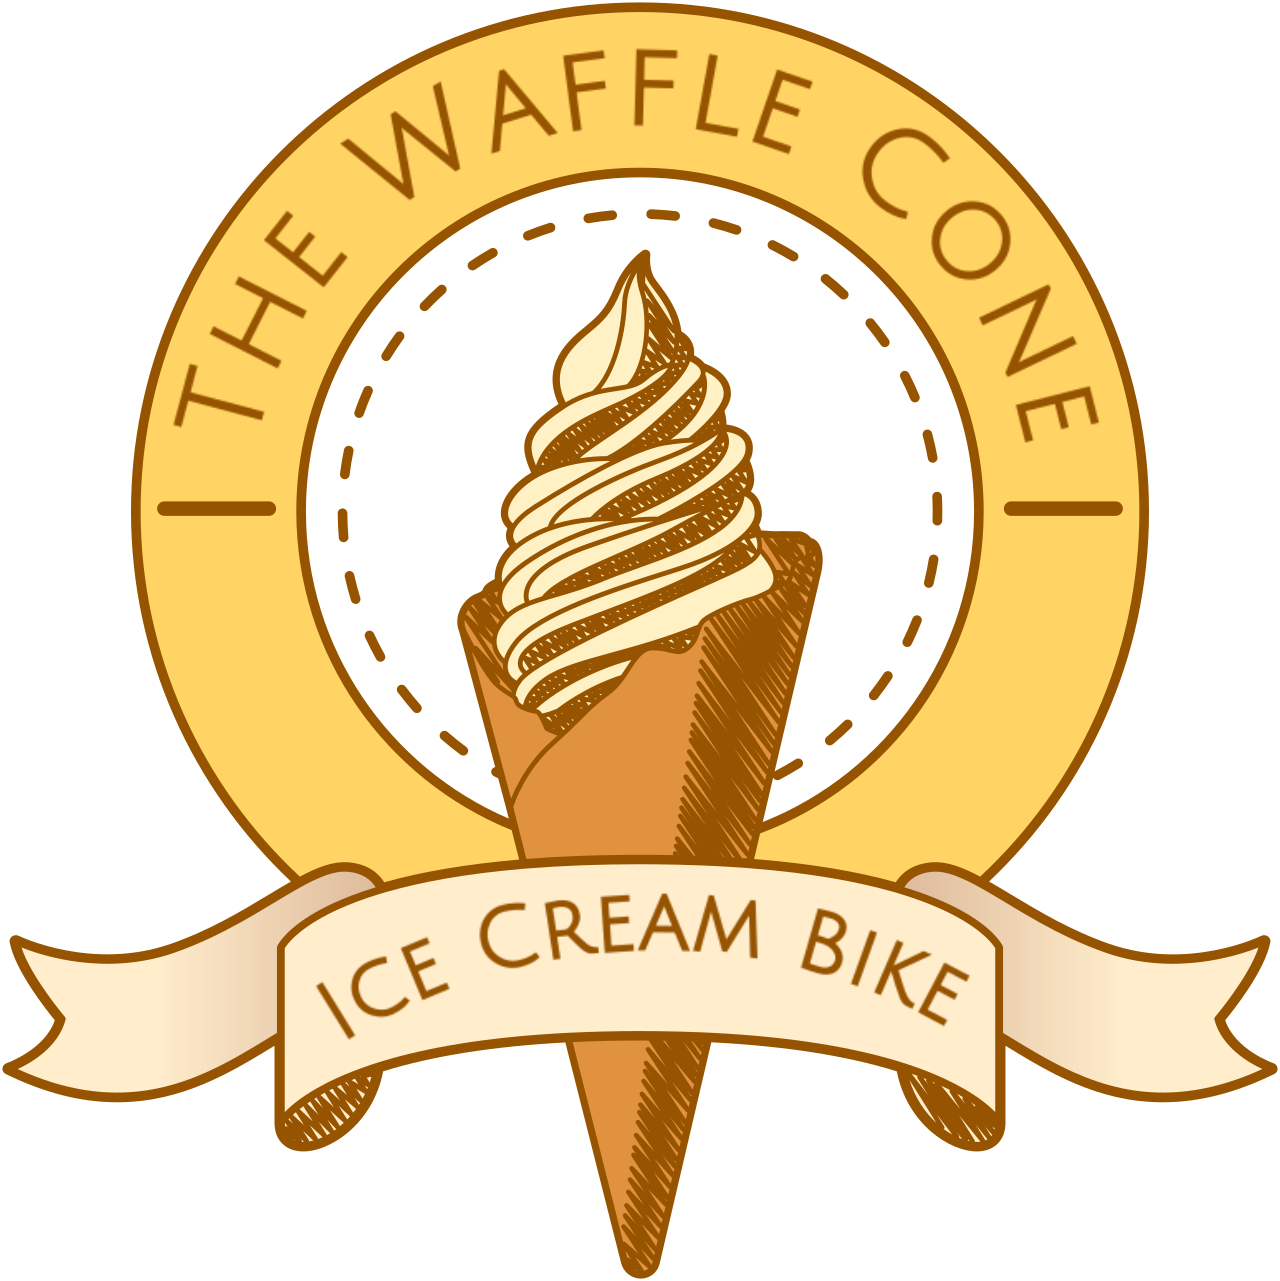 The Waffle Cone's web page